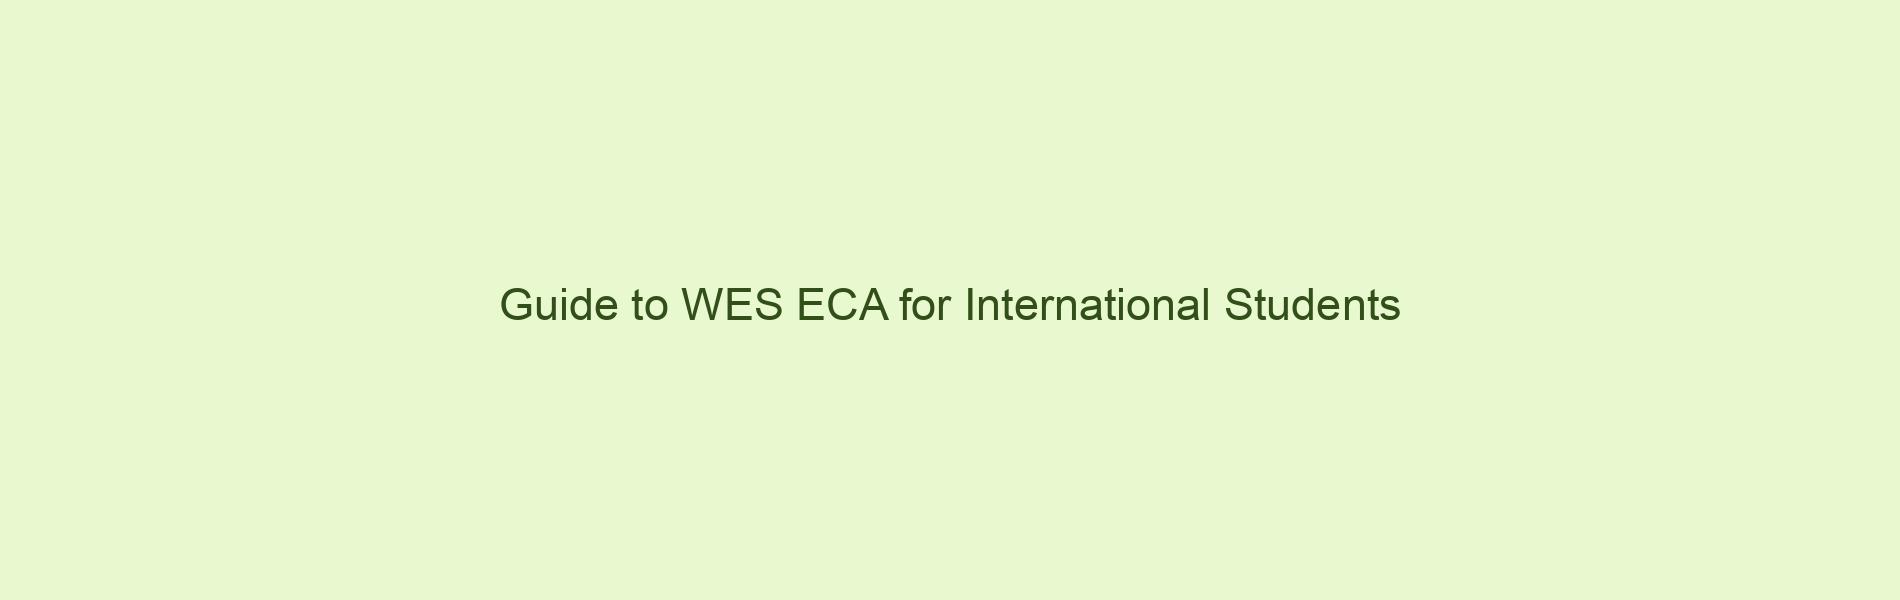 Guide to WES ECA for International Students